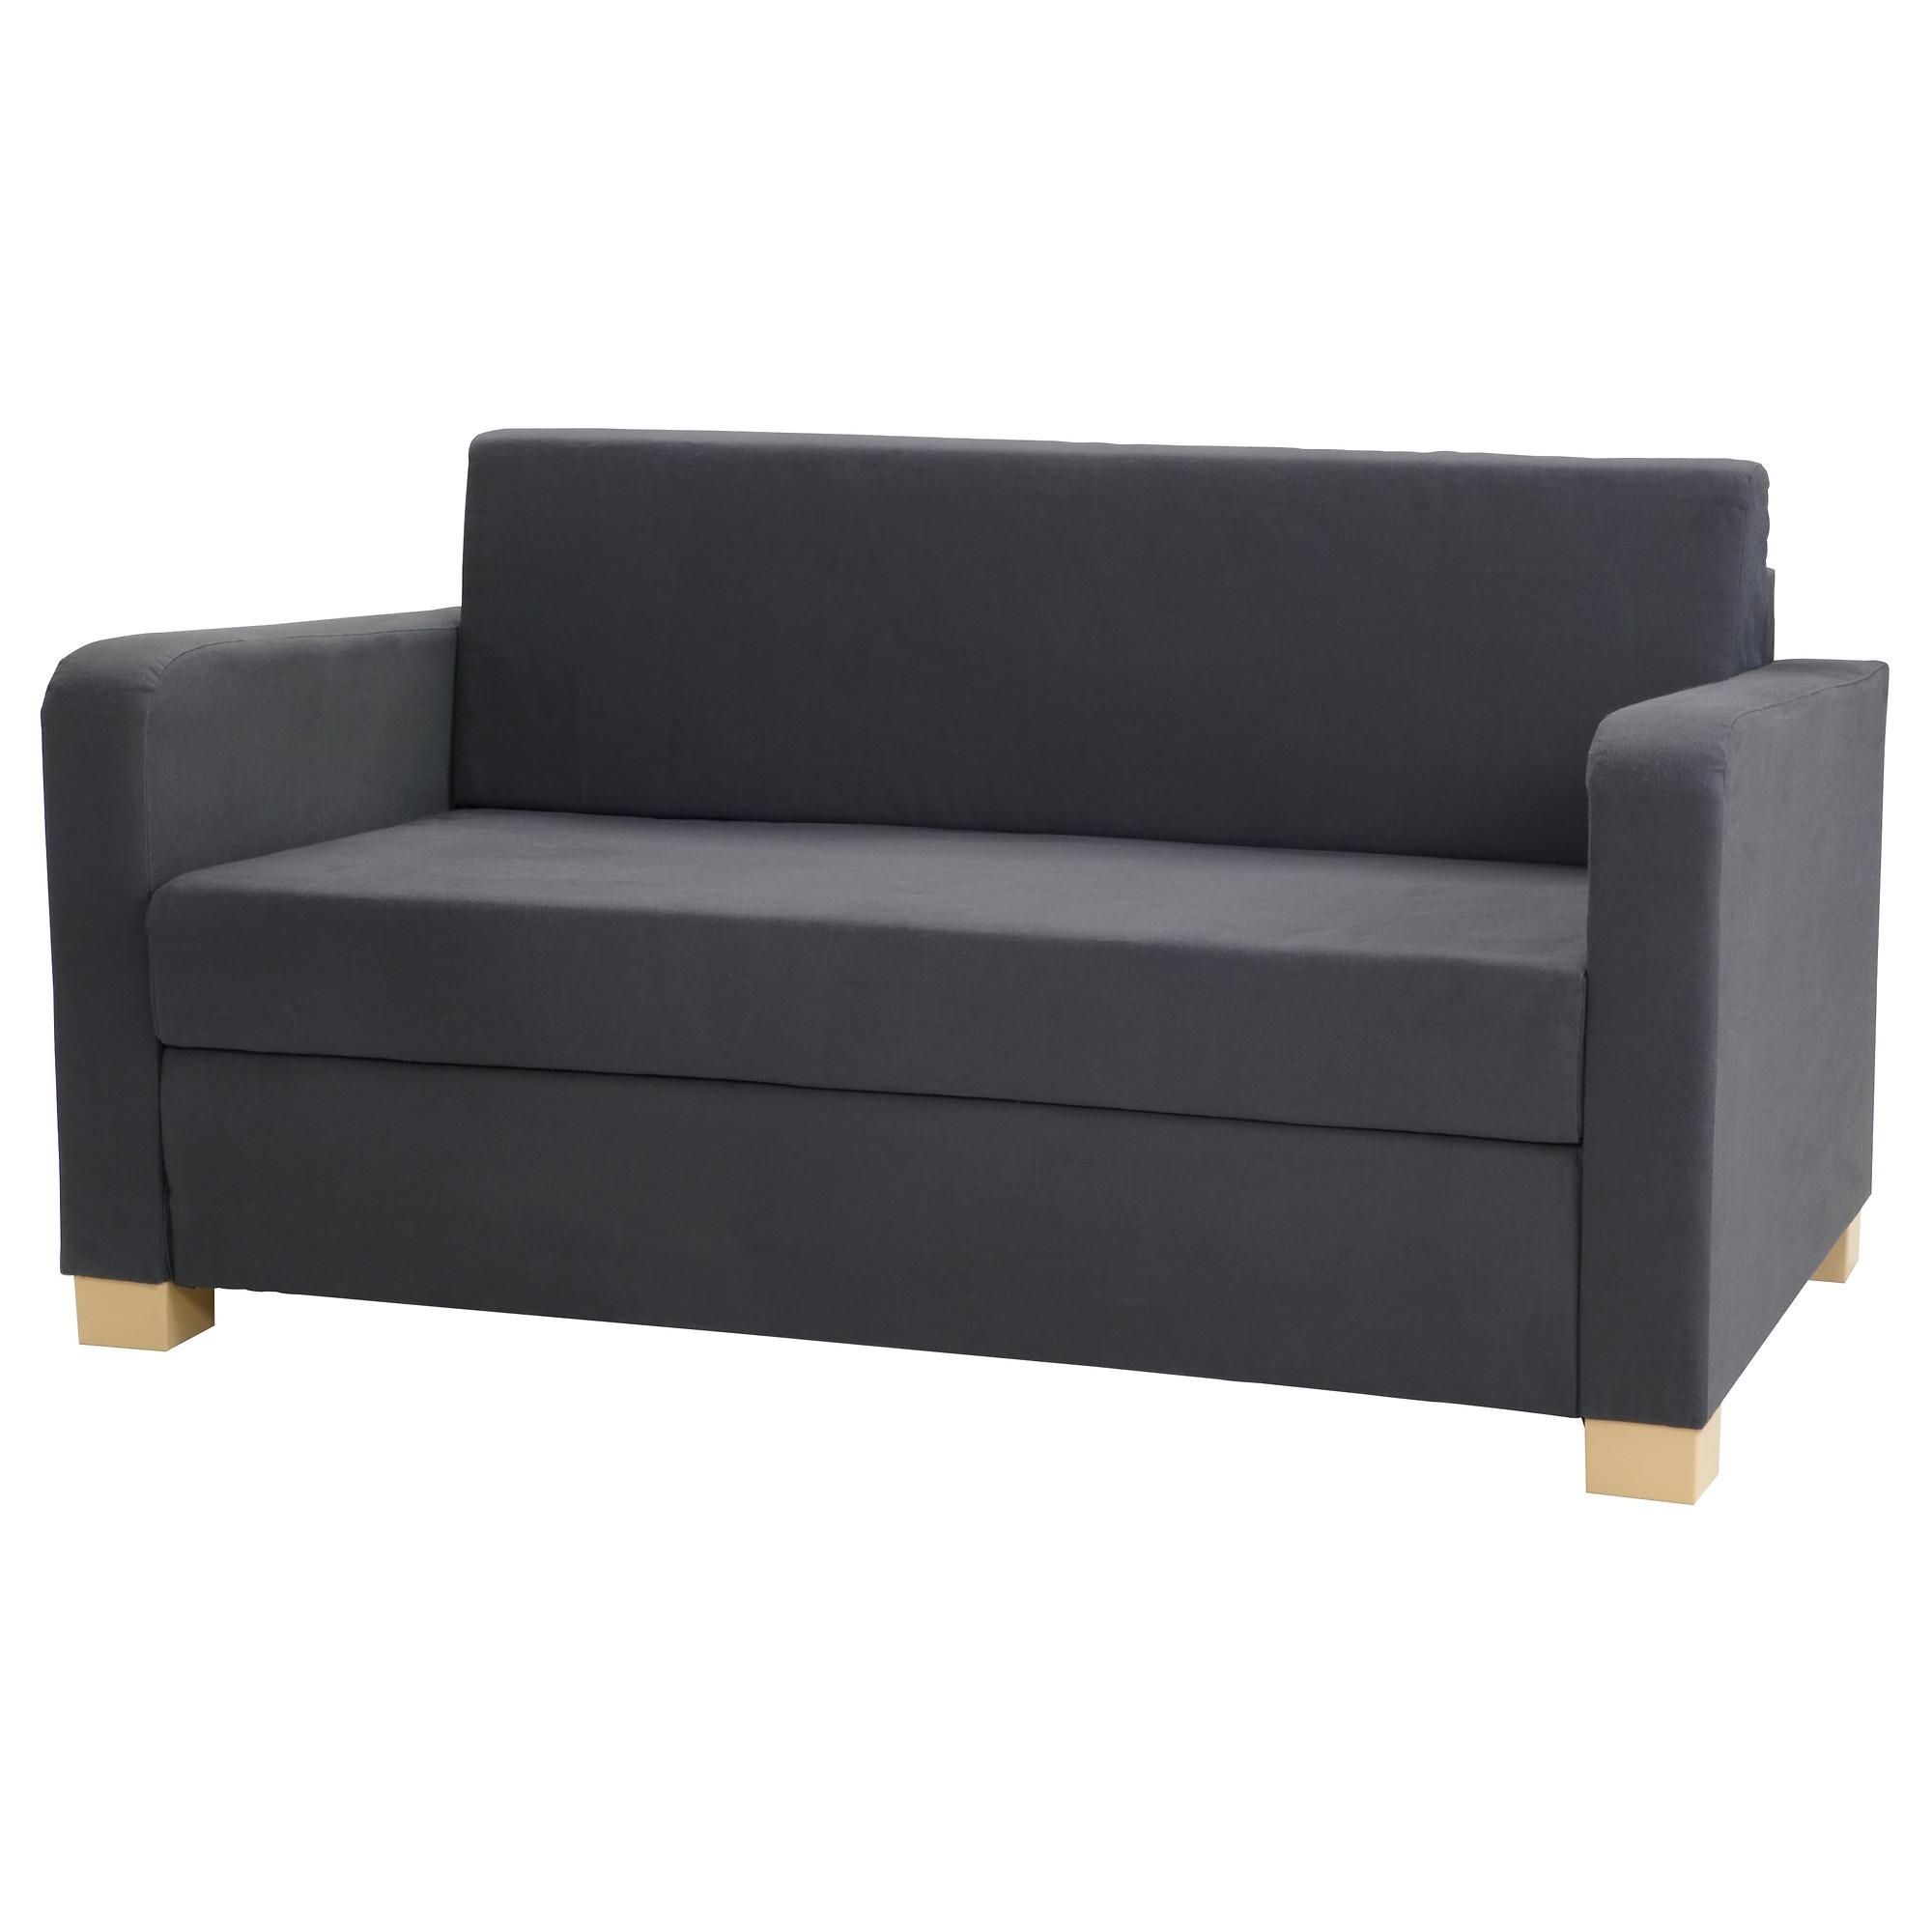 Sofa Beds & Futons – Ikea With Ikea Loveseat Sleeper Sofas (View 2 of 20)